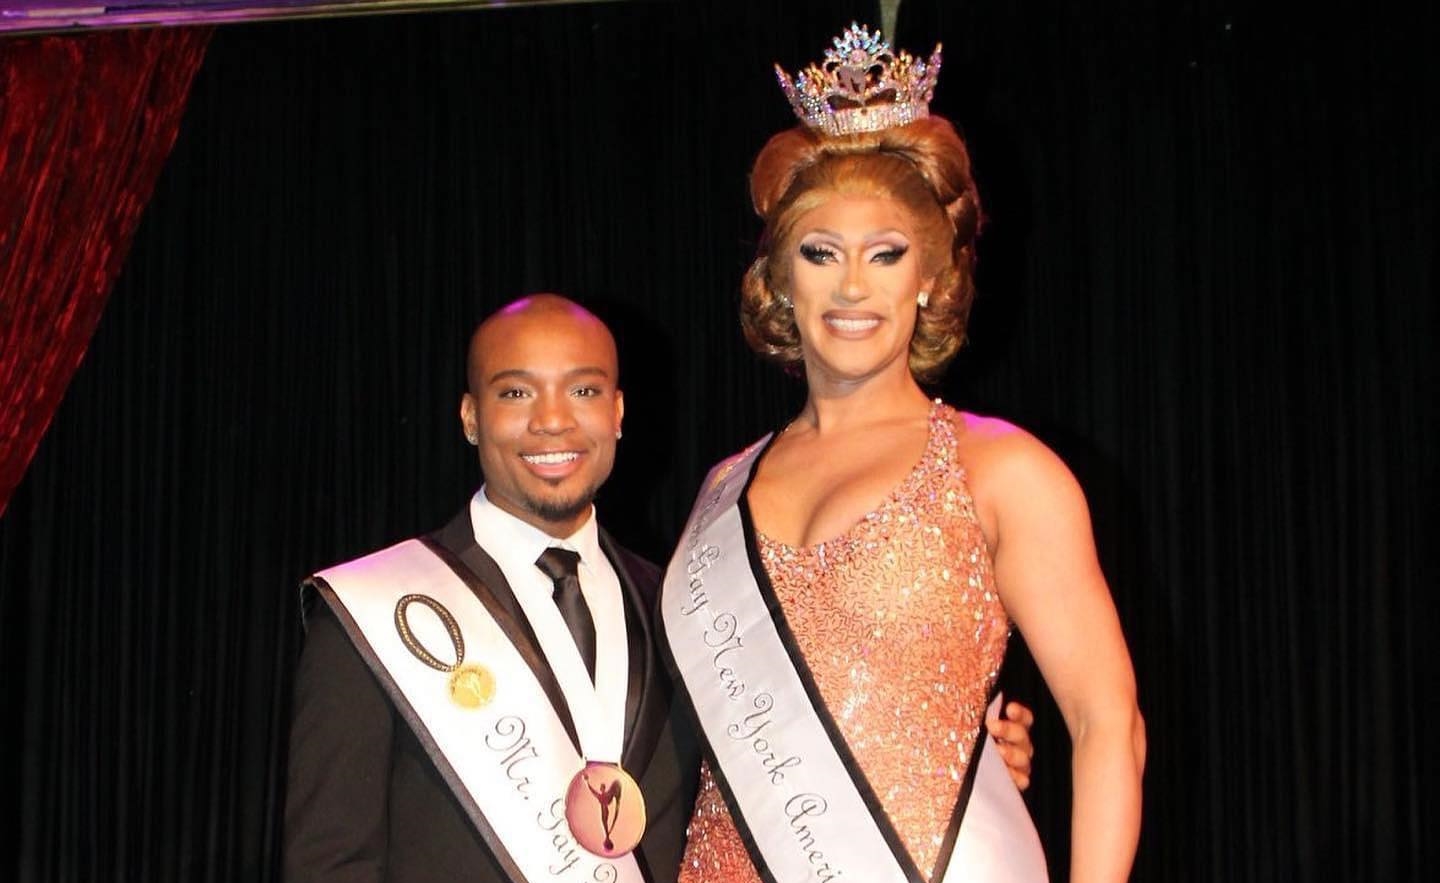 Geo Glam and Brenda Dharling at Mr. and Miss Gay New York America | Cutting Room (New York, New York) | 3/10/2020 CROPPED